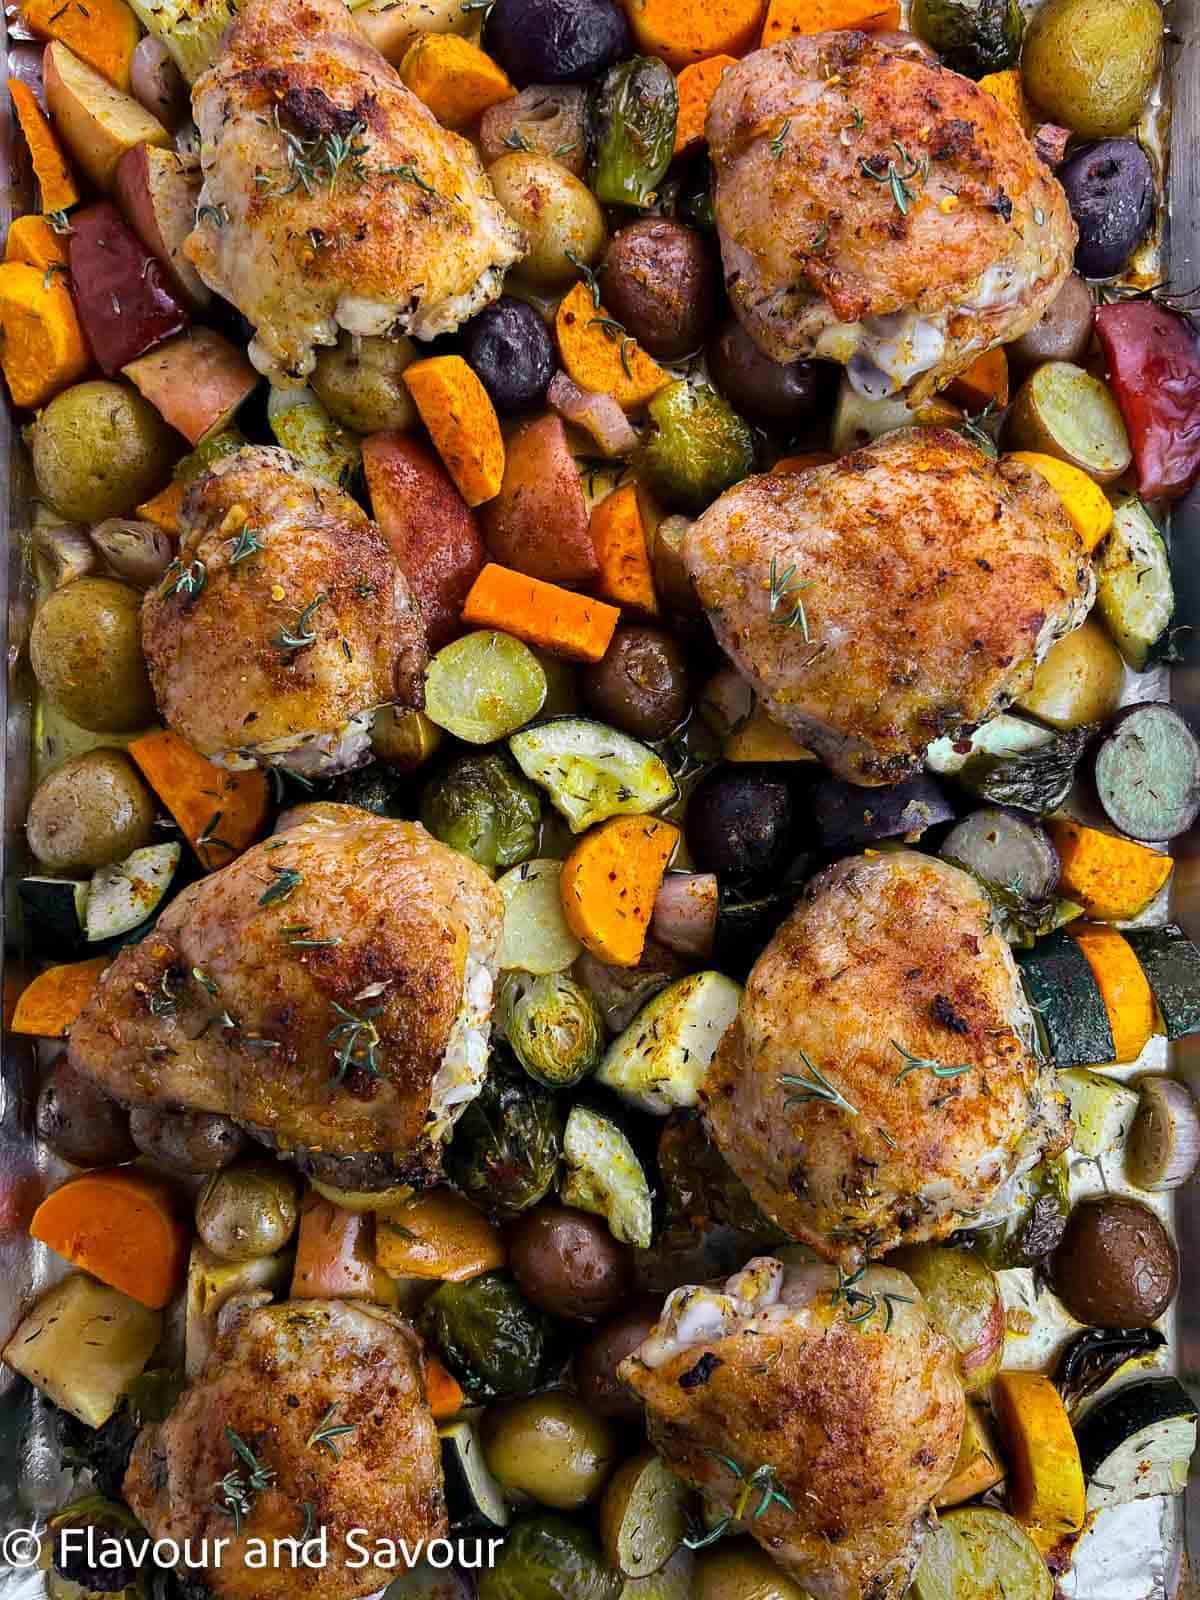 Overhead view of roasted chicken thighs and vegetables on a sheet pan.